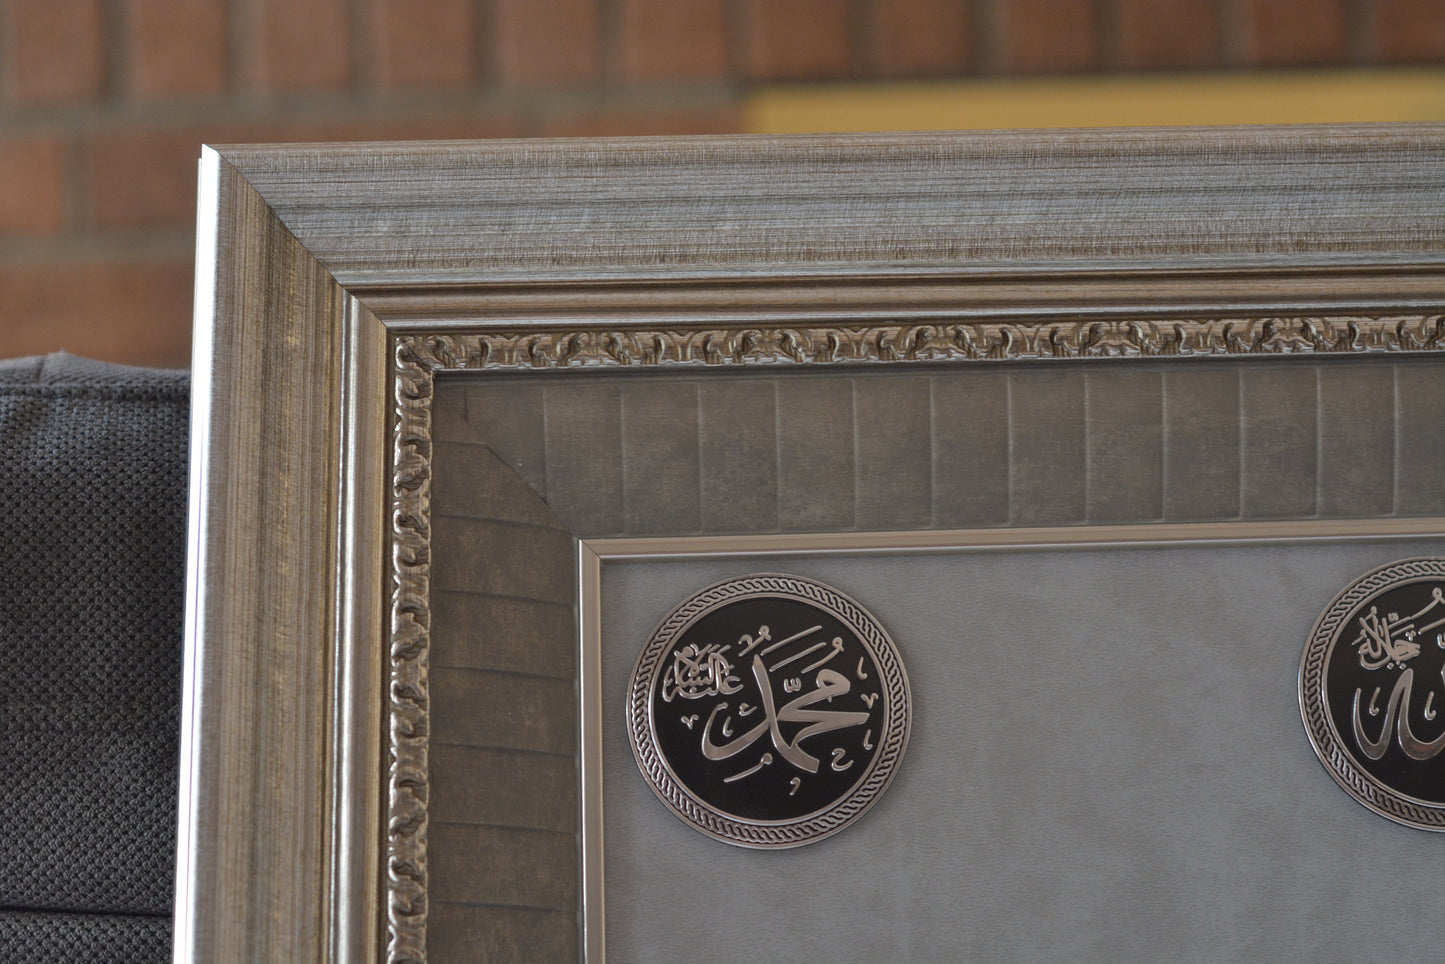 Kabaa Mecca Frame 20.5"x19" Two Colors